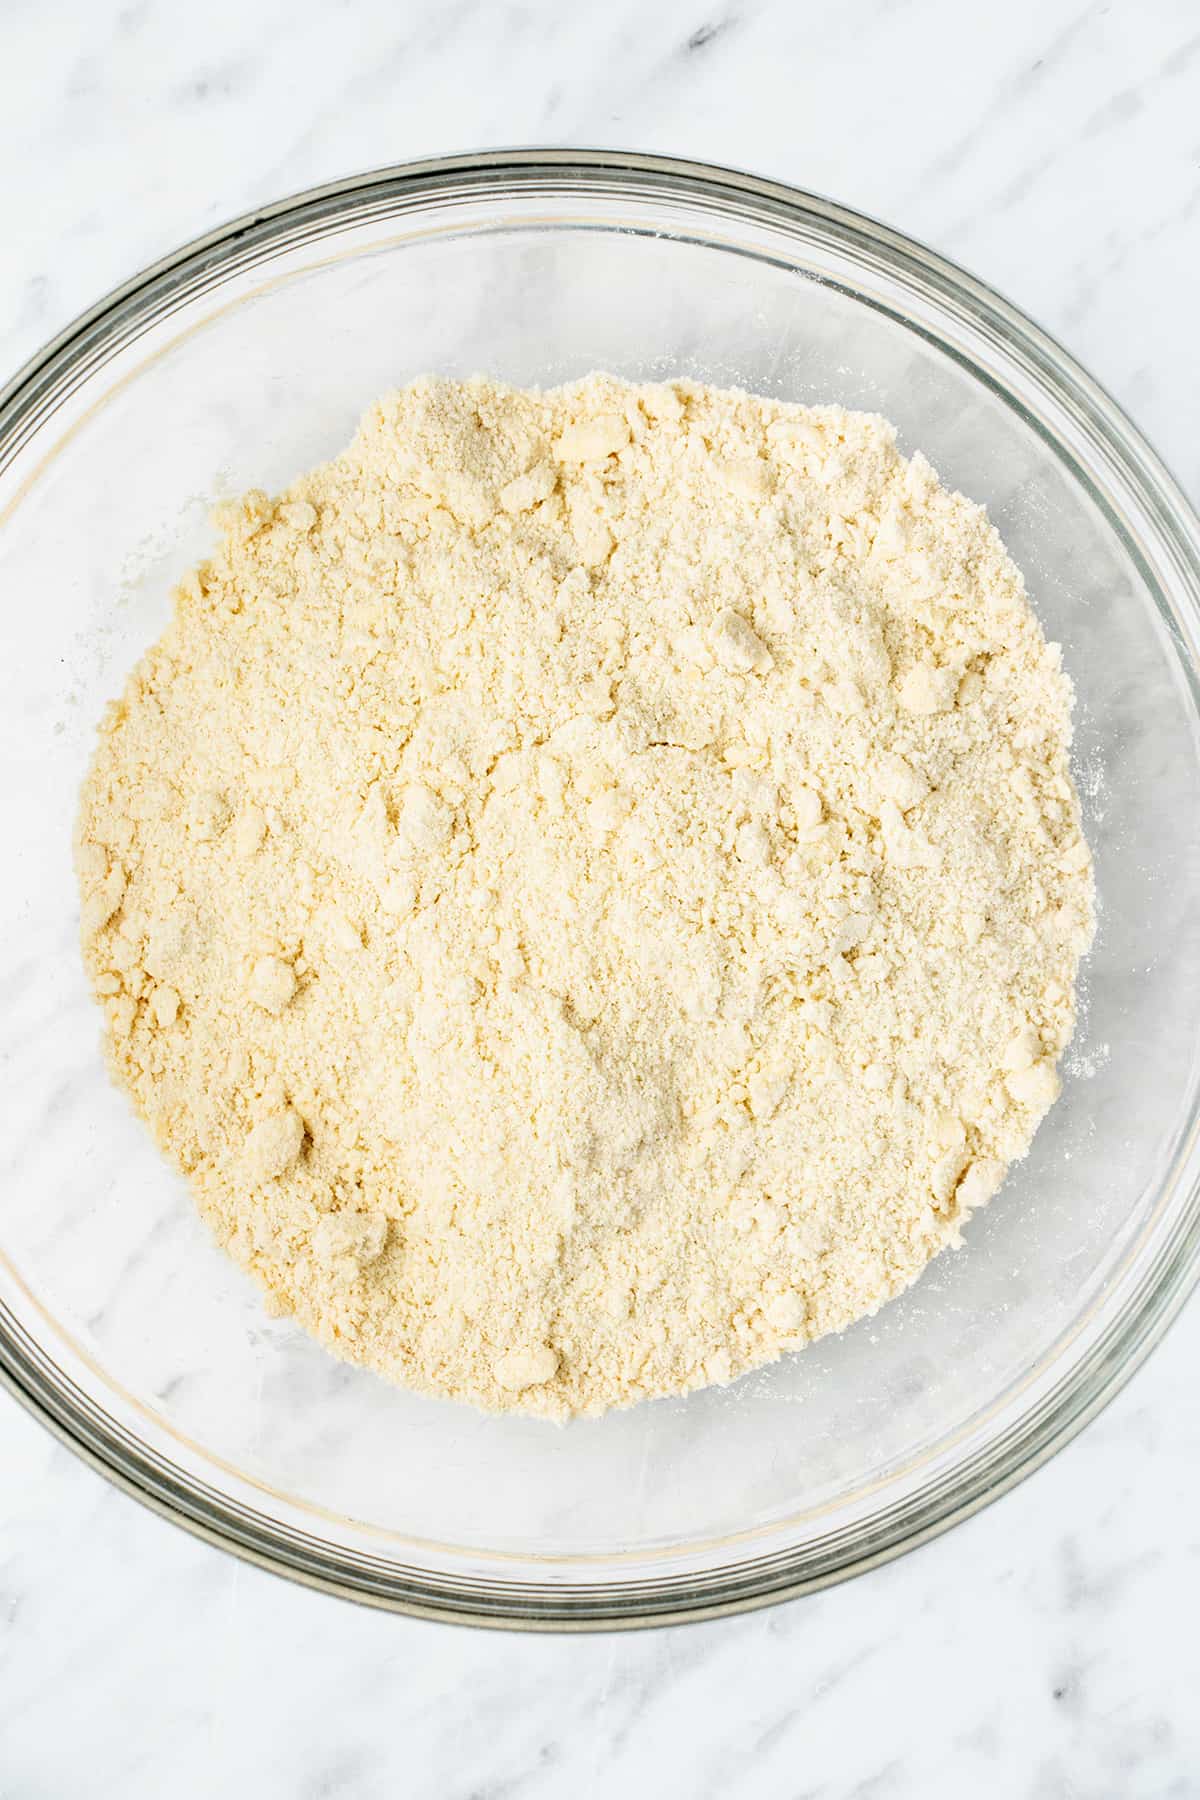 Flour and butter cut together in a mixing bowl.